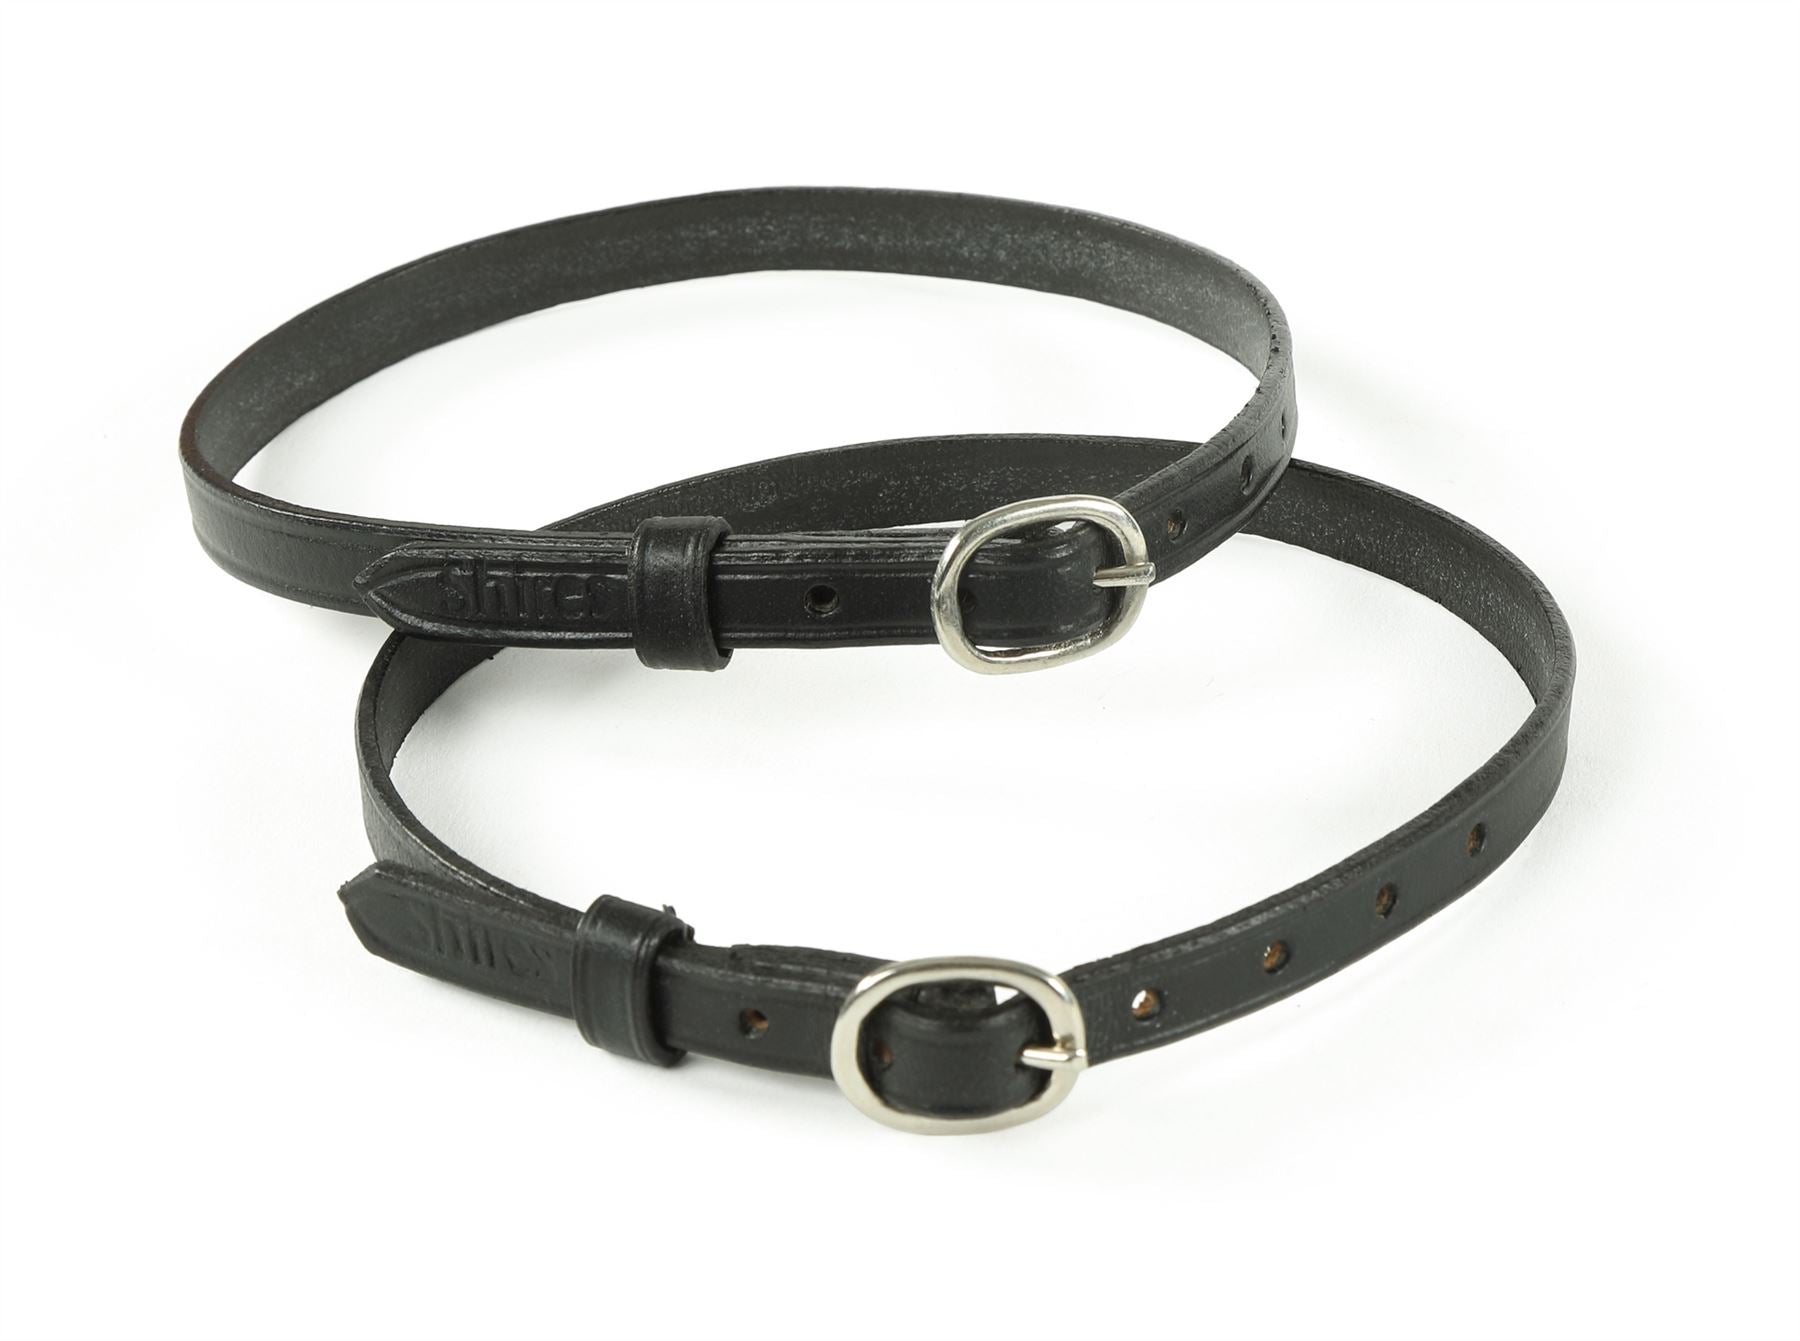 Shires Blenheim Leather Spur Straps - Just Horse Riders